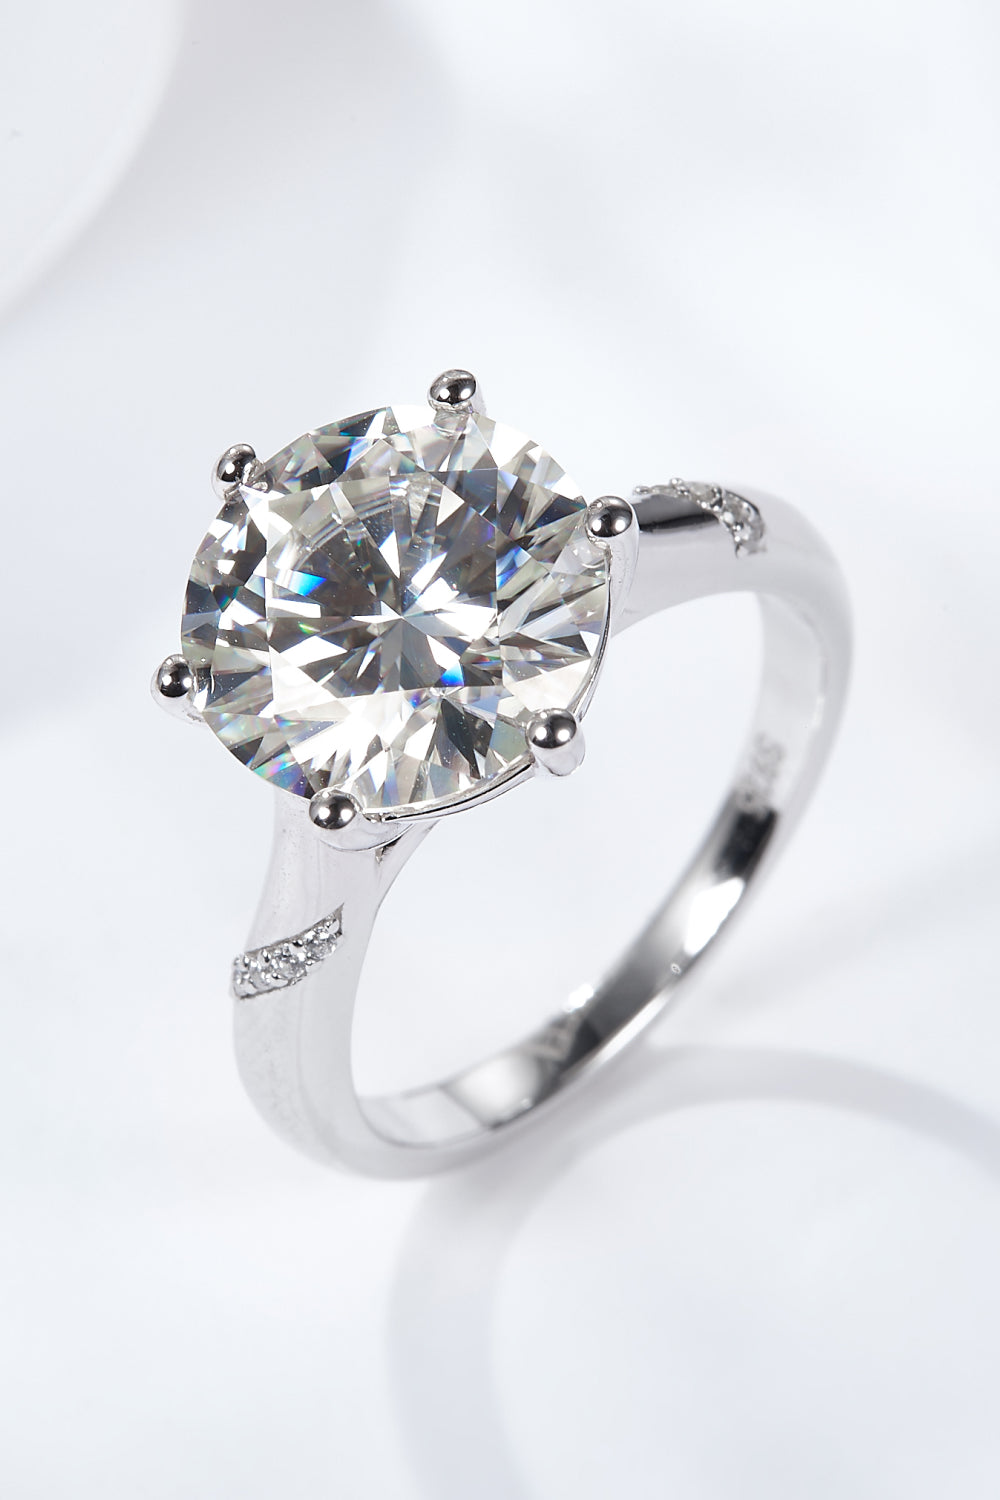 5 Carat Moissanite Solitaire Ring-Rings-Inspired by Justeen-Women's Clothing Boutique in Chicago, Illinois